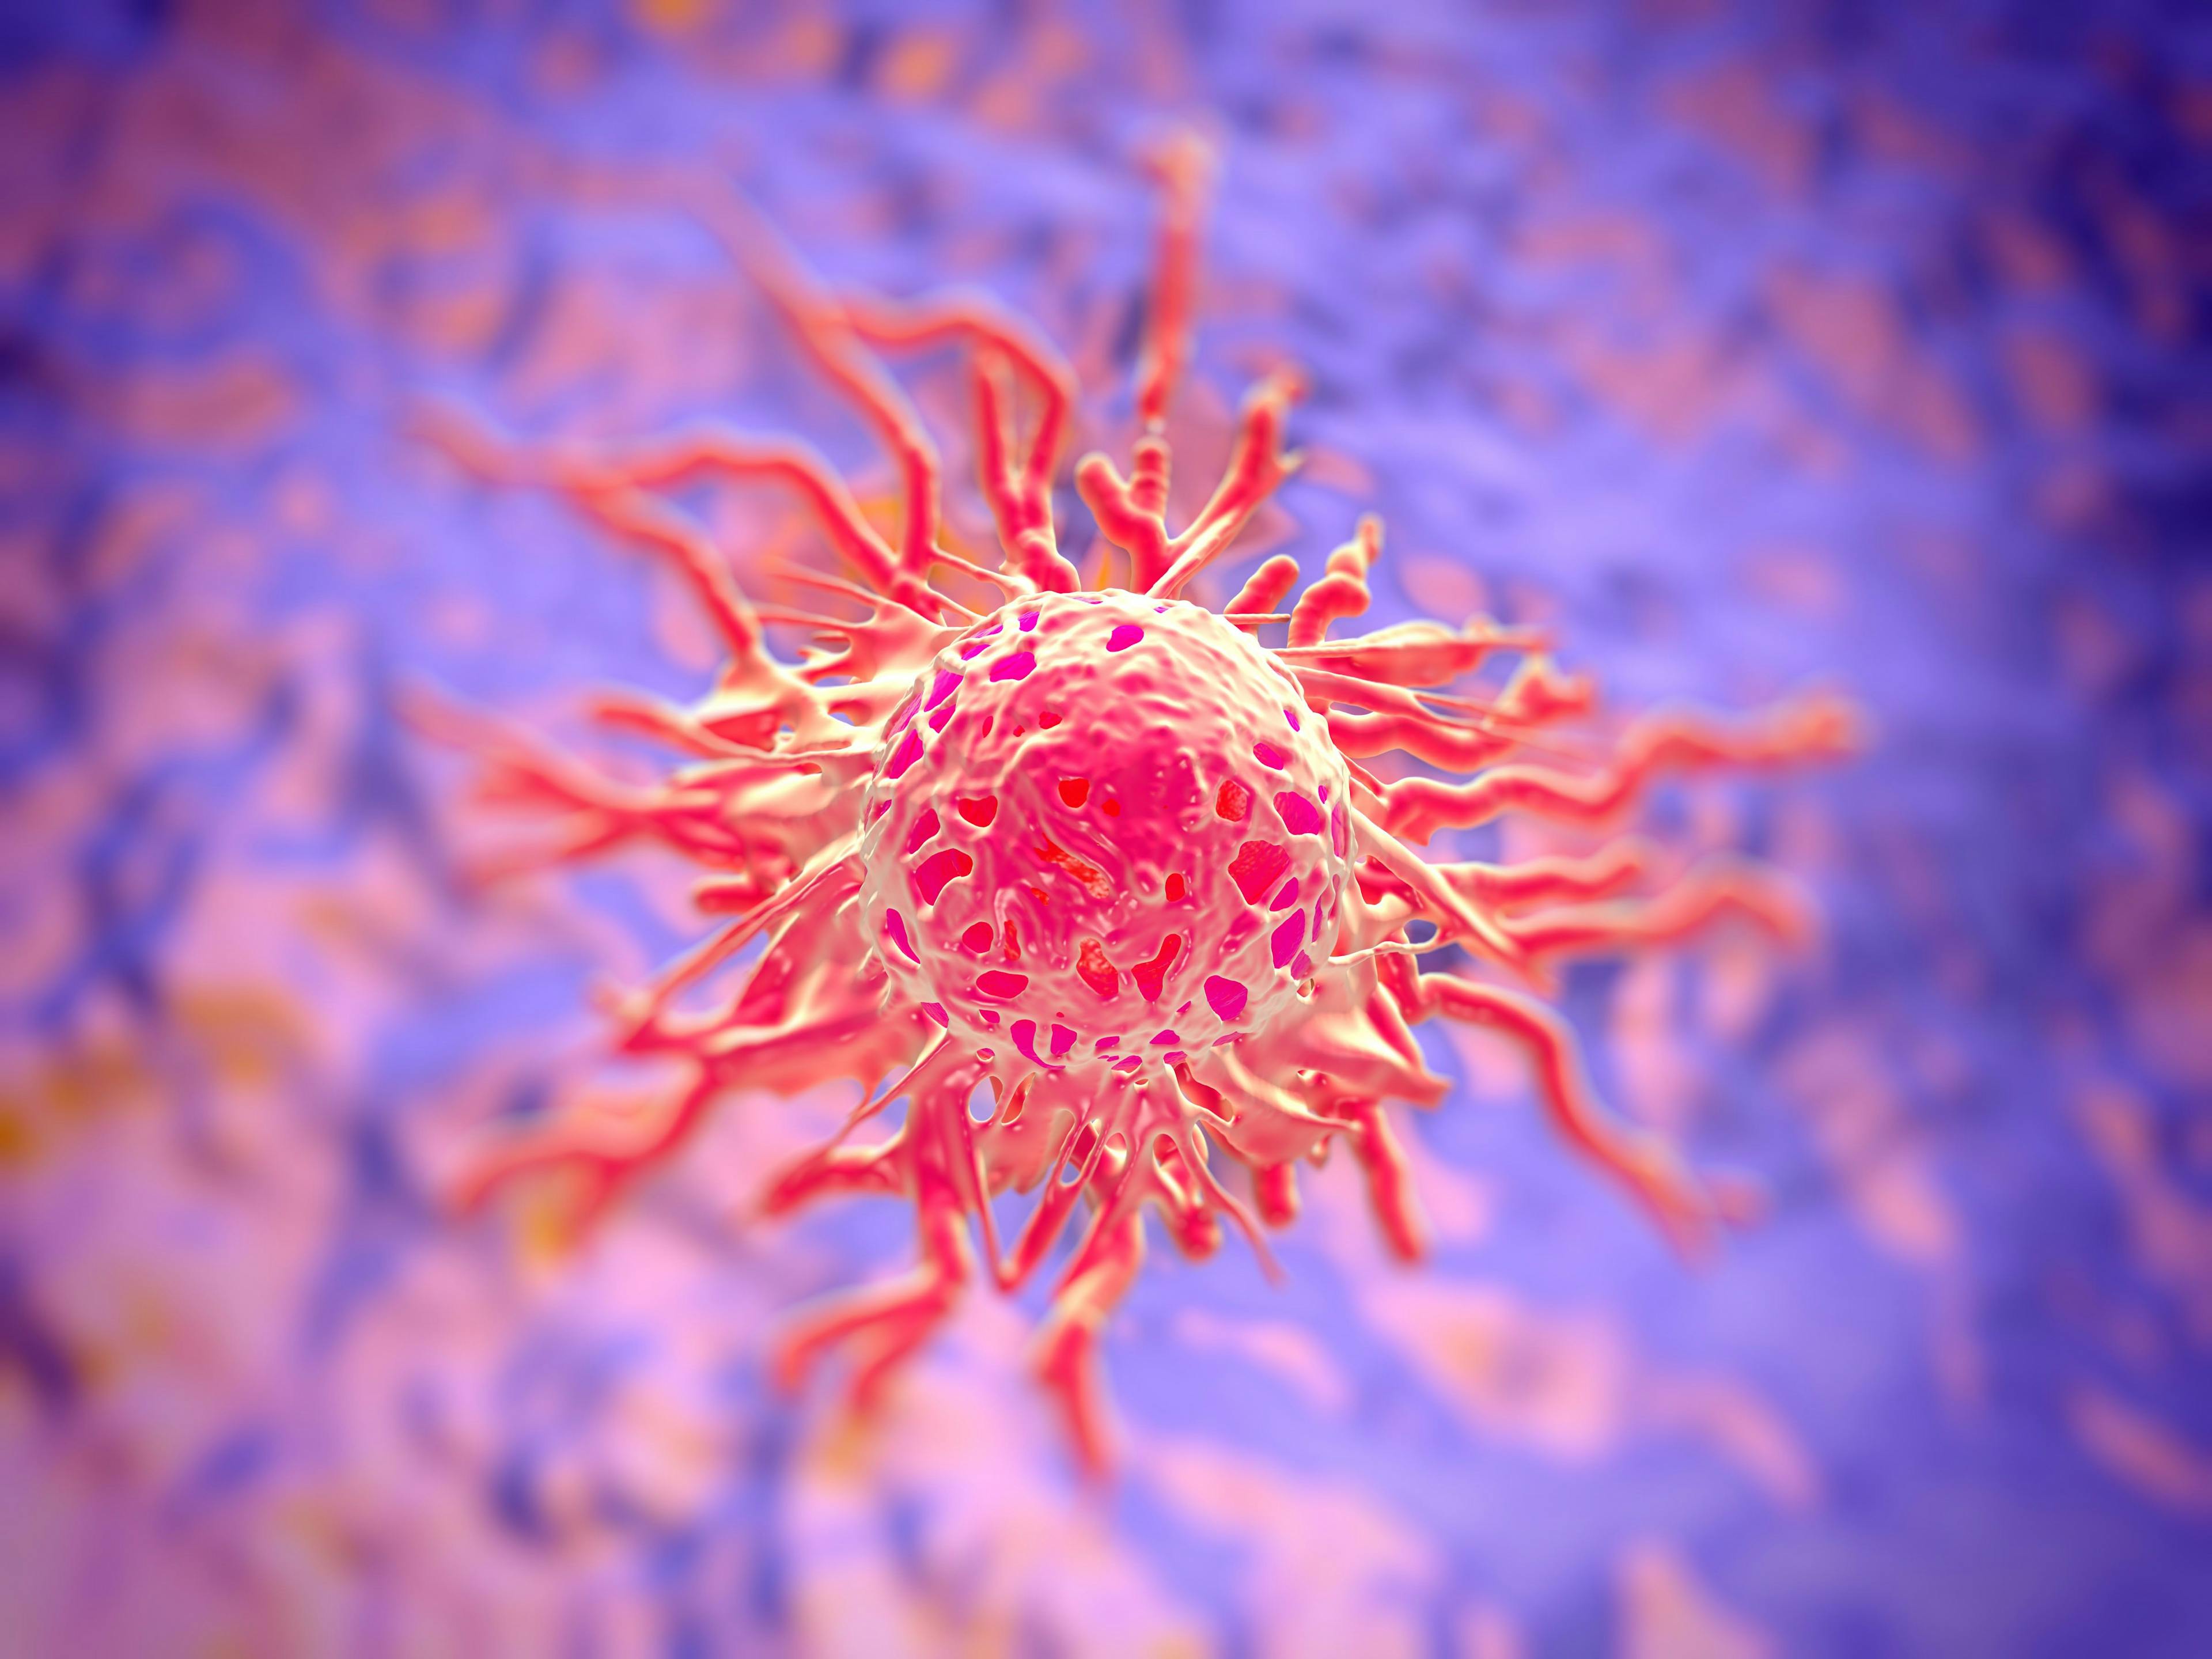 Trodelvy Shows Positive Results for Patients With Metastatic Breast Cancer